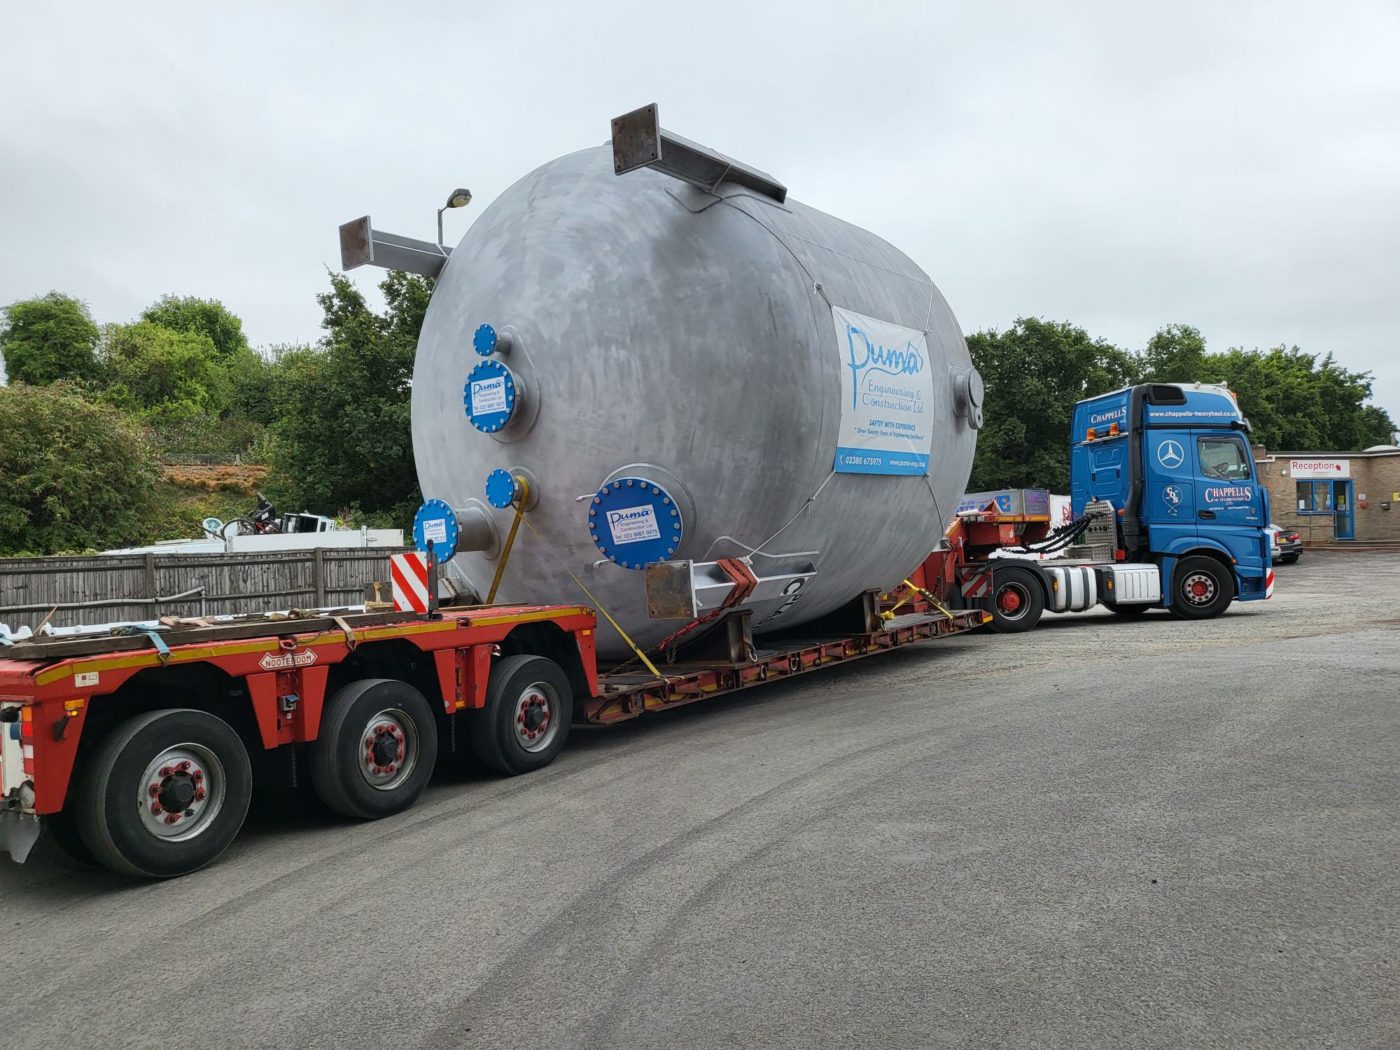 Pressure vessel being transported on a truck